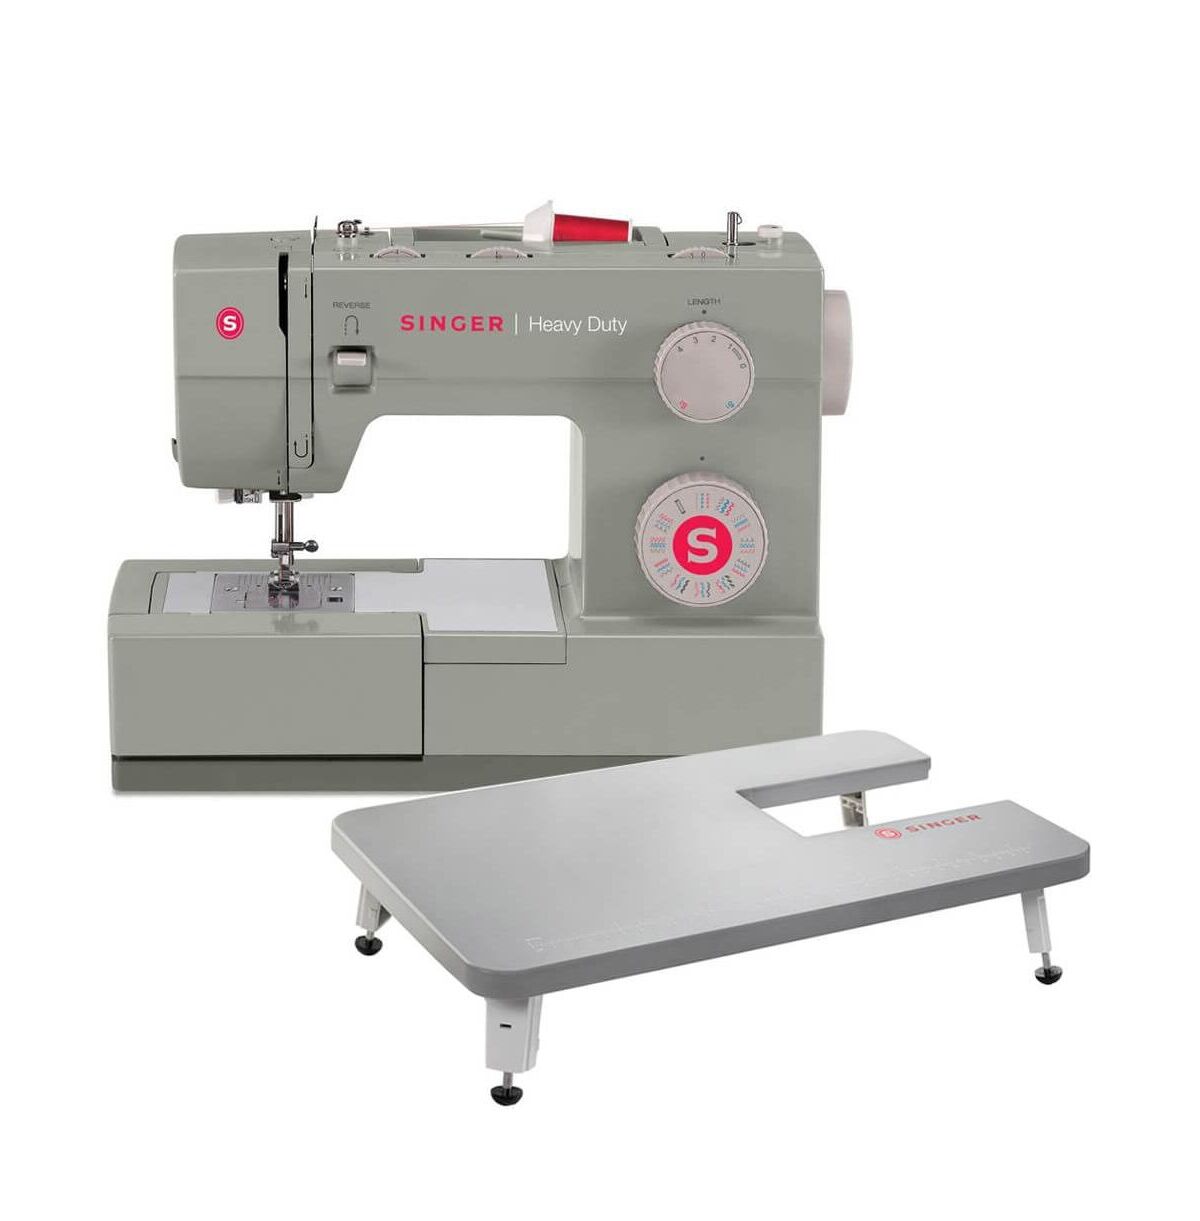 Singer Heavy Duty 4452 Sewing Machine with Extension Table - Grey